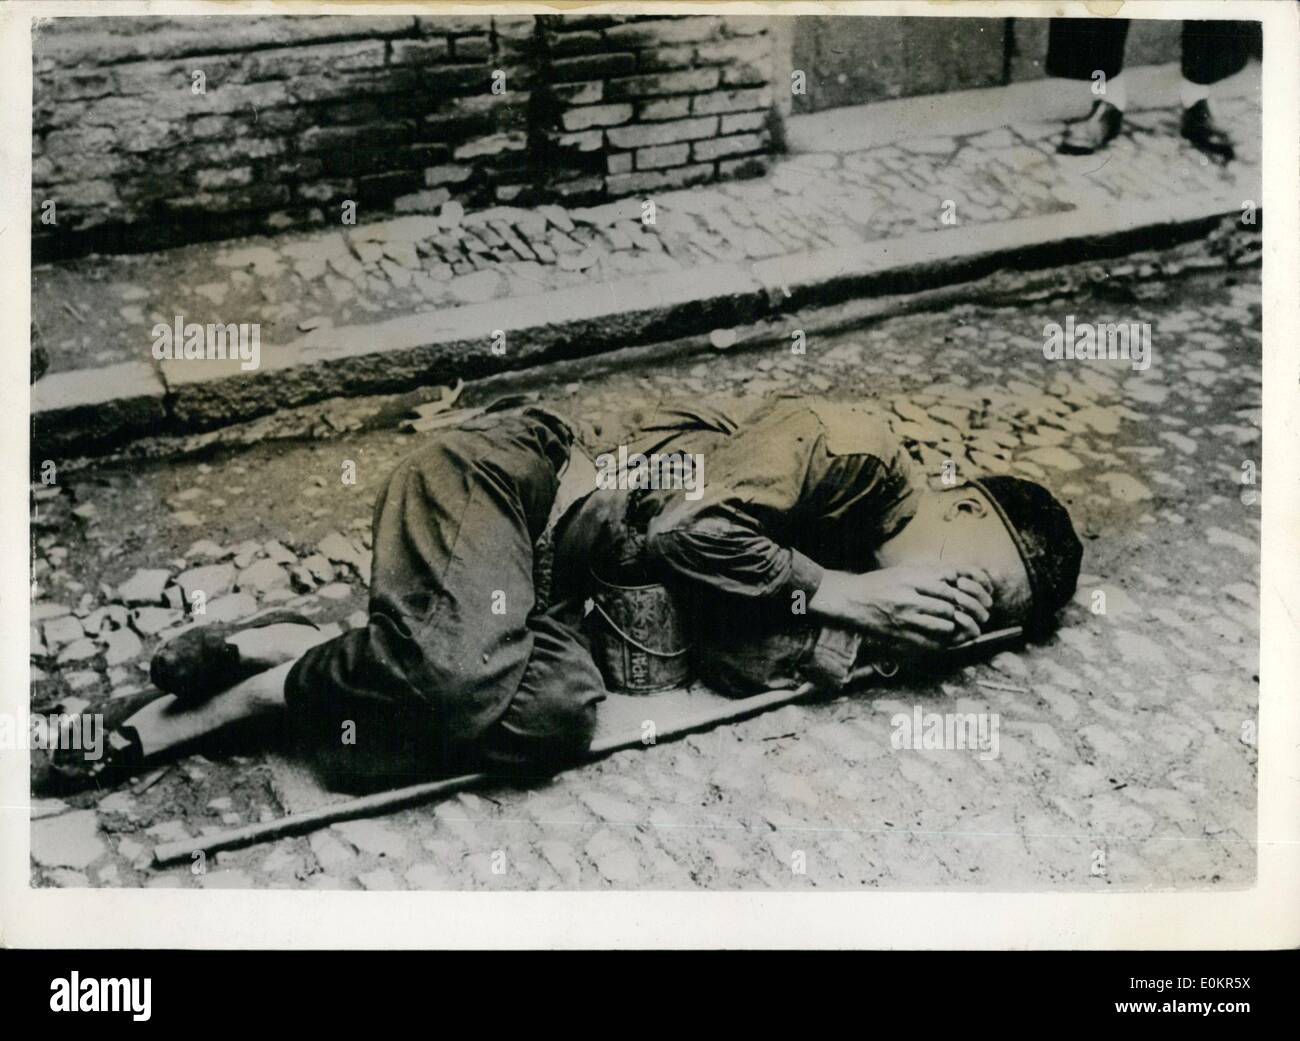 Jun. 06, 1946 - Starvation In China!!!!! End Of A Fruitless Search For Food: An aged Chinese,who had walked as as he could he search for food, sinks to the ground, exhausted -too weak to go any further. The soup can be carries, is till empty, lying under his body, Such tragedies are an everyday occurrences in China's famine area. Stock Photo